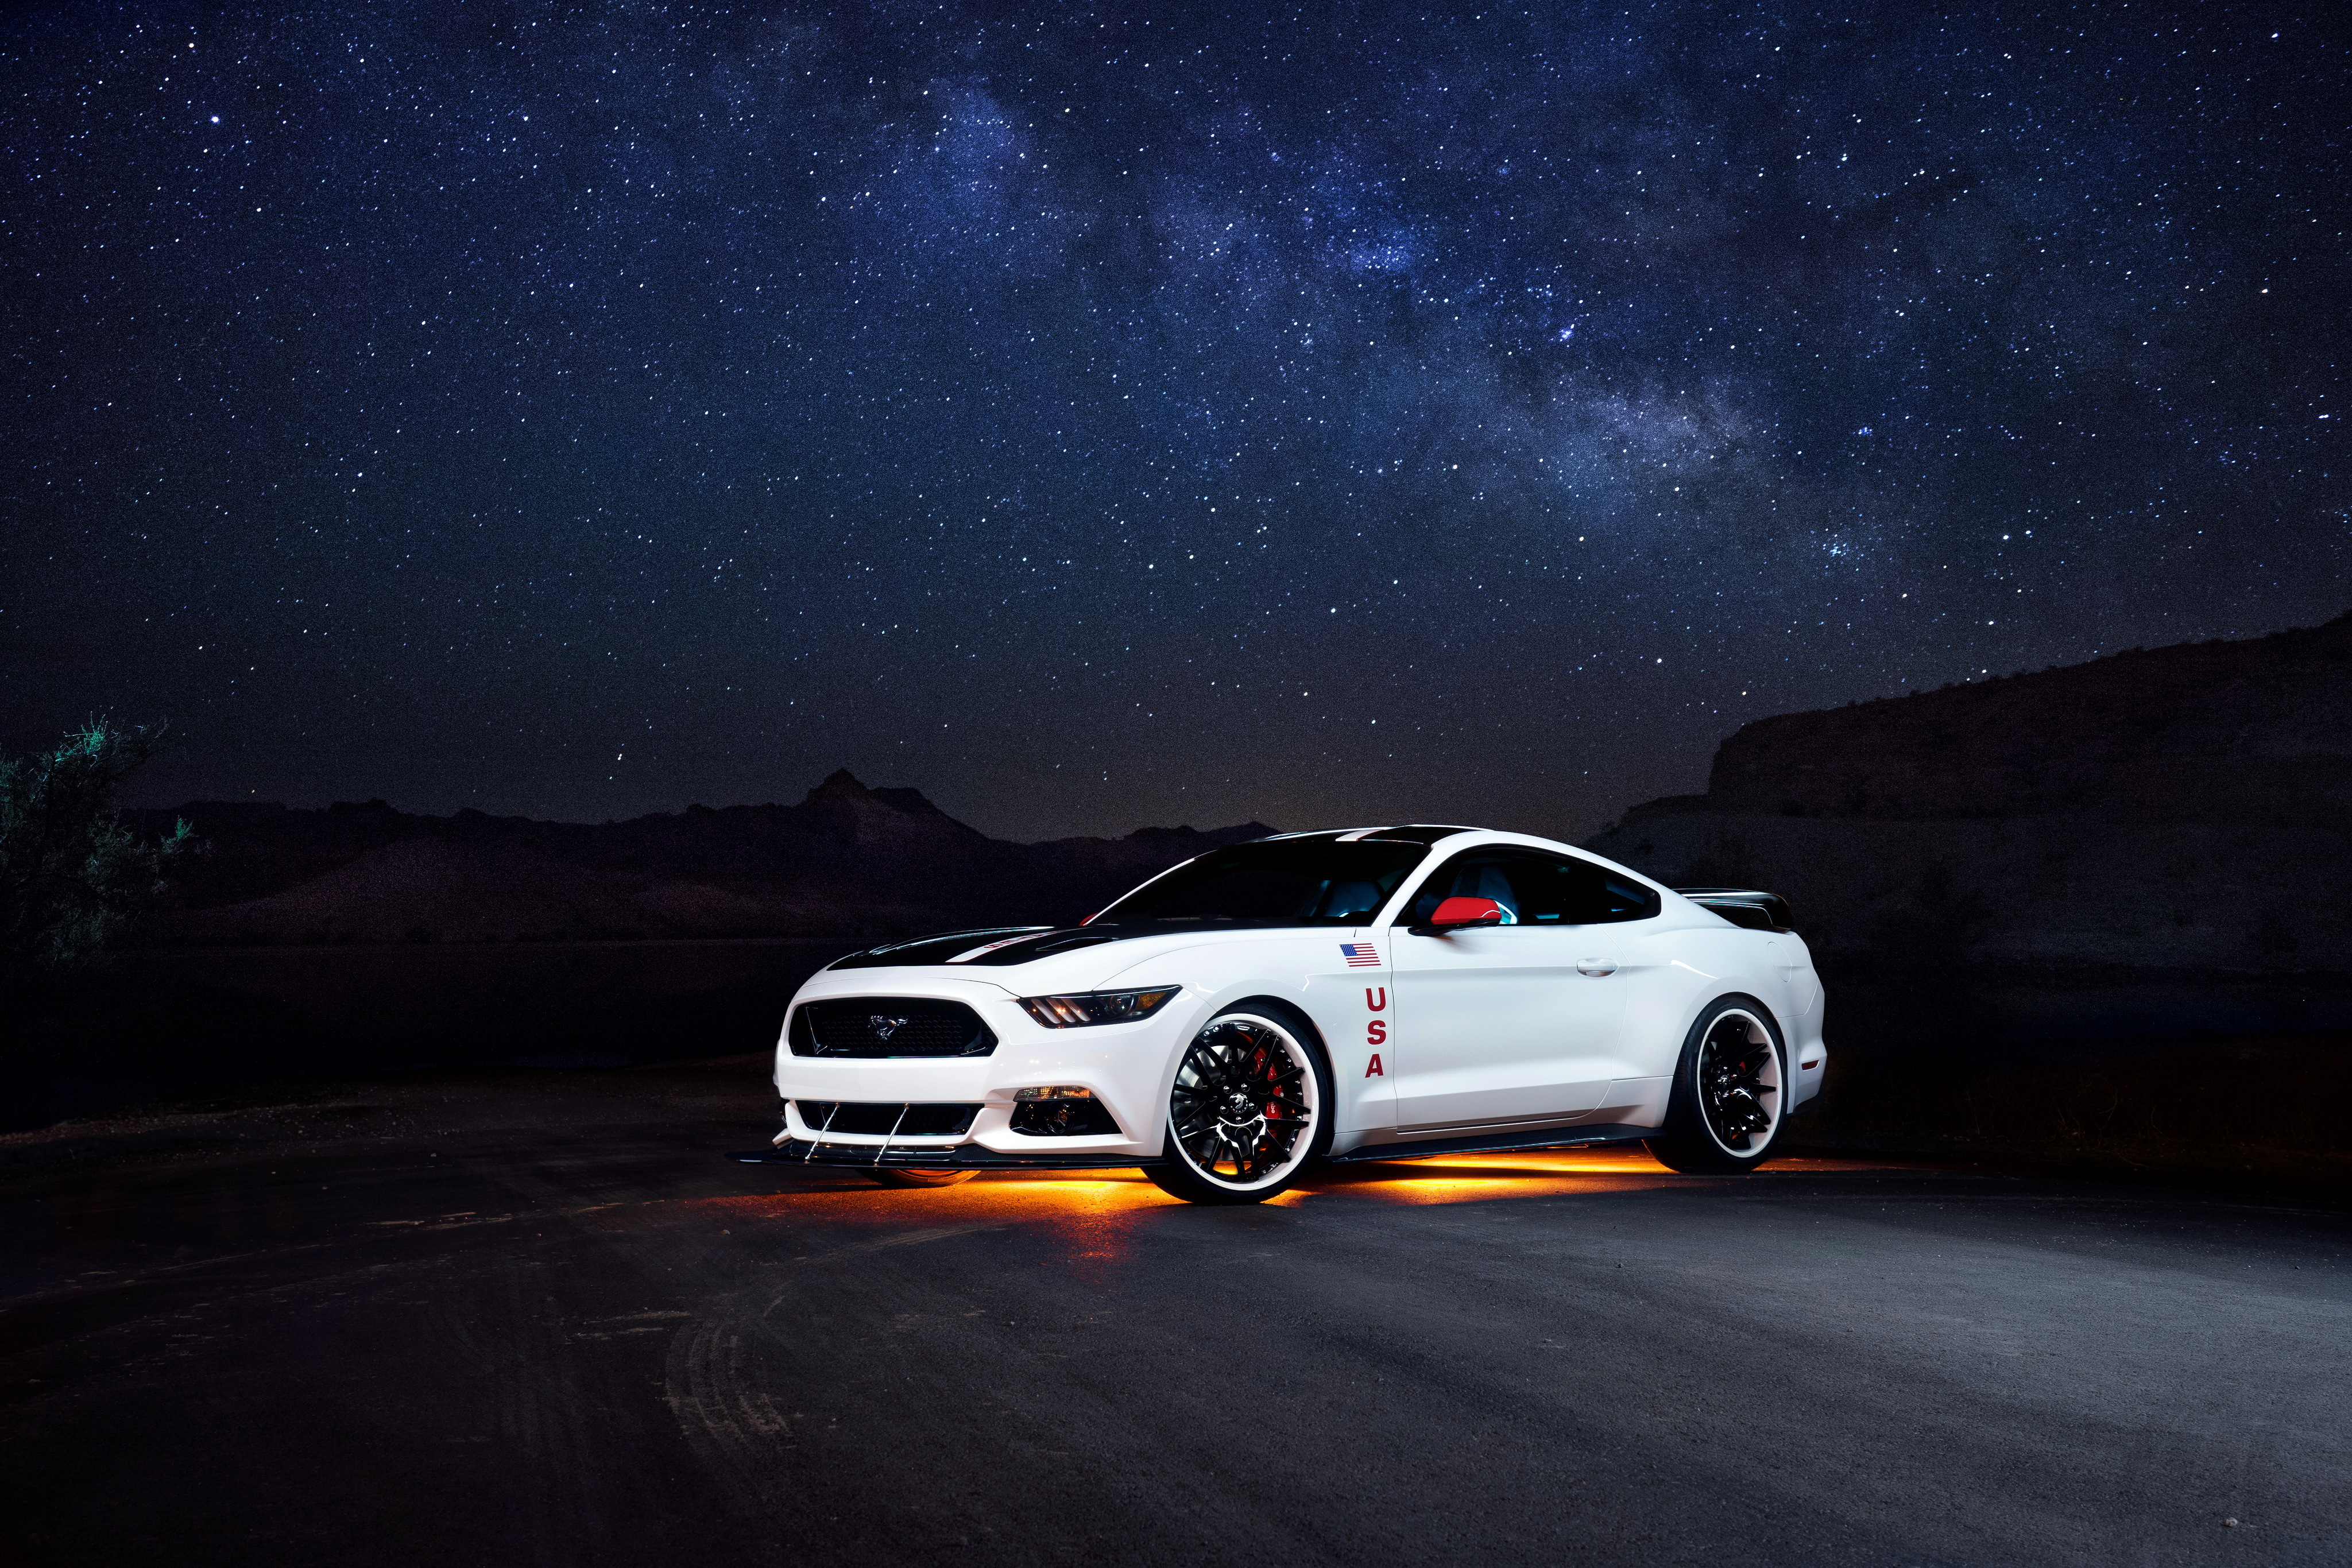 night, white, side view, ford HD Wallpaper for Phone